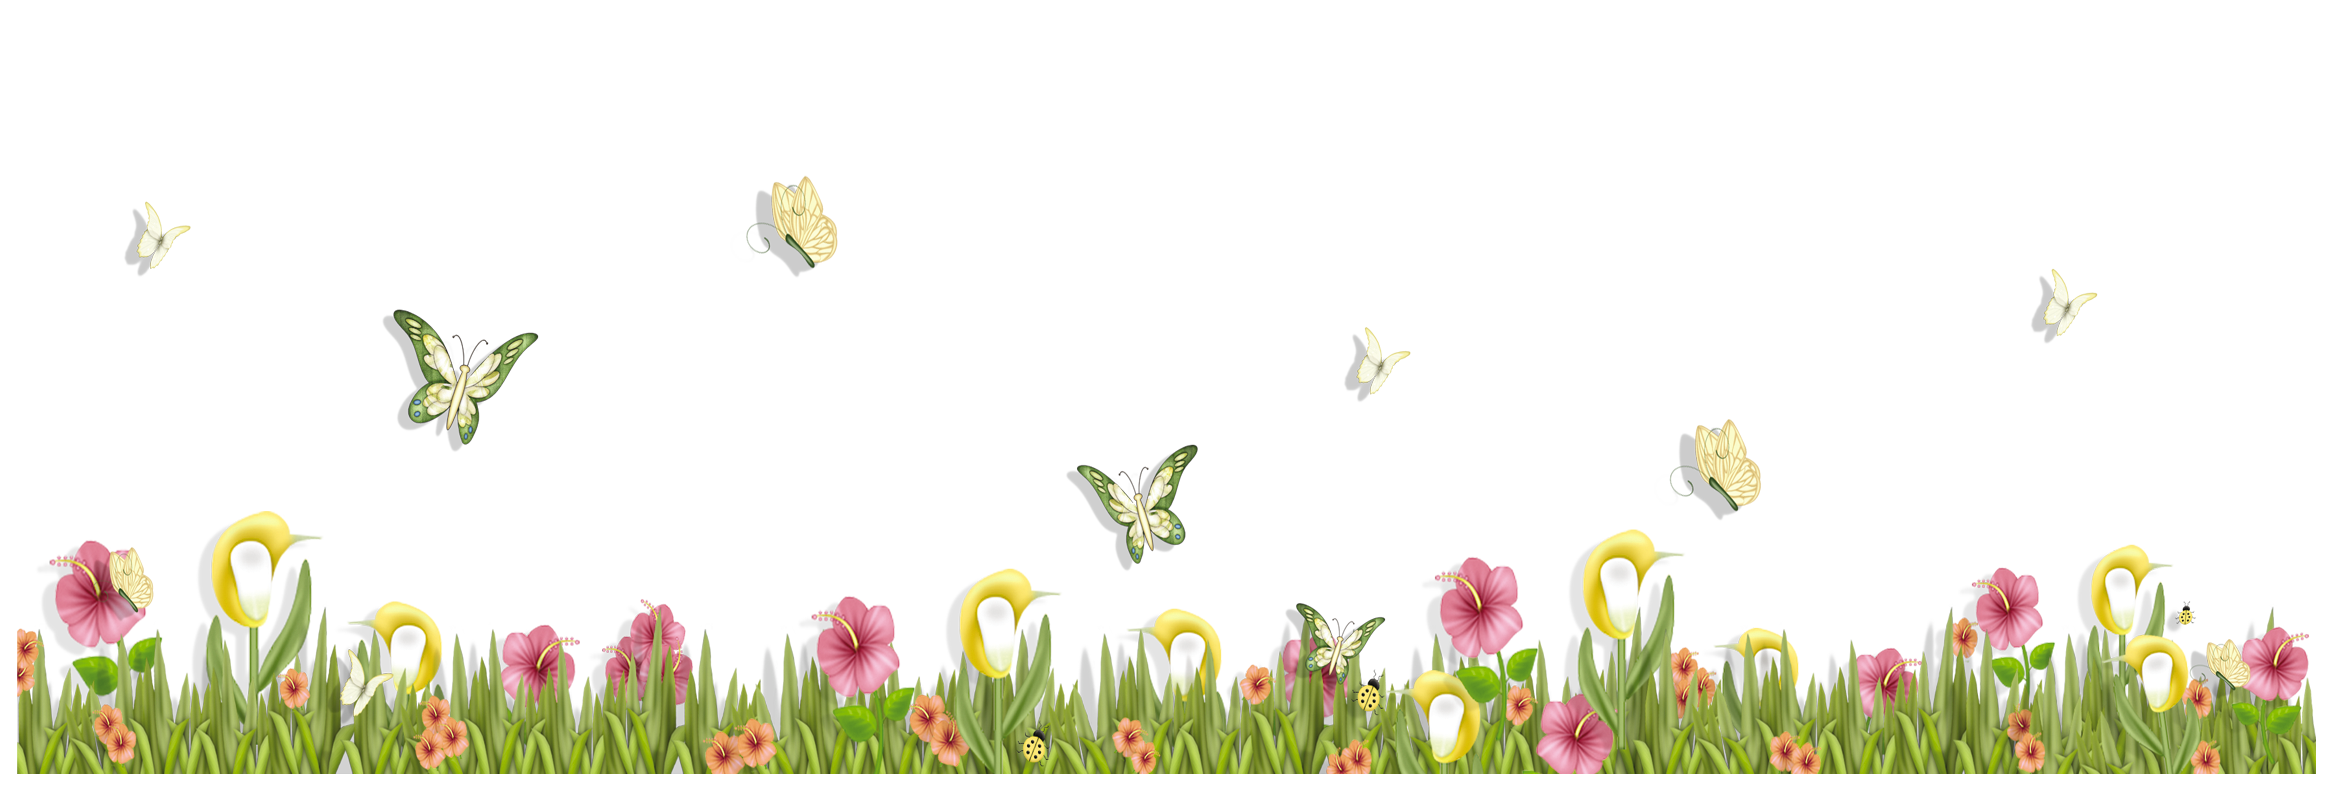 Meadow PNG Image Background